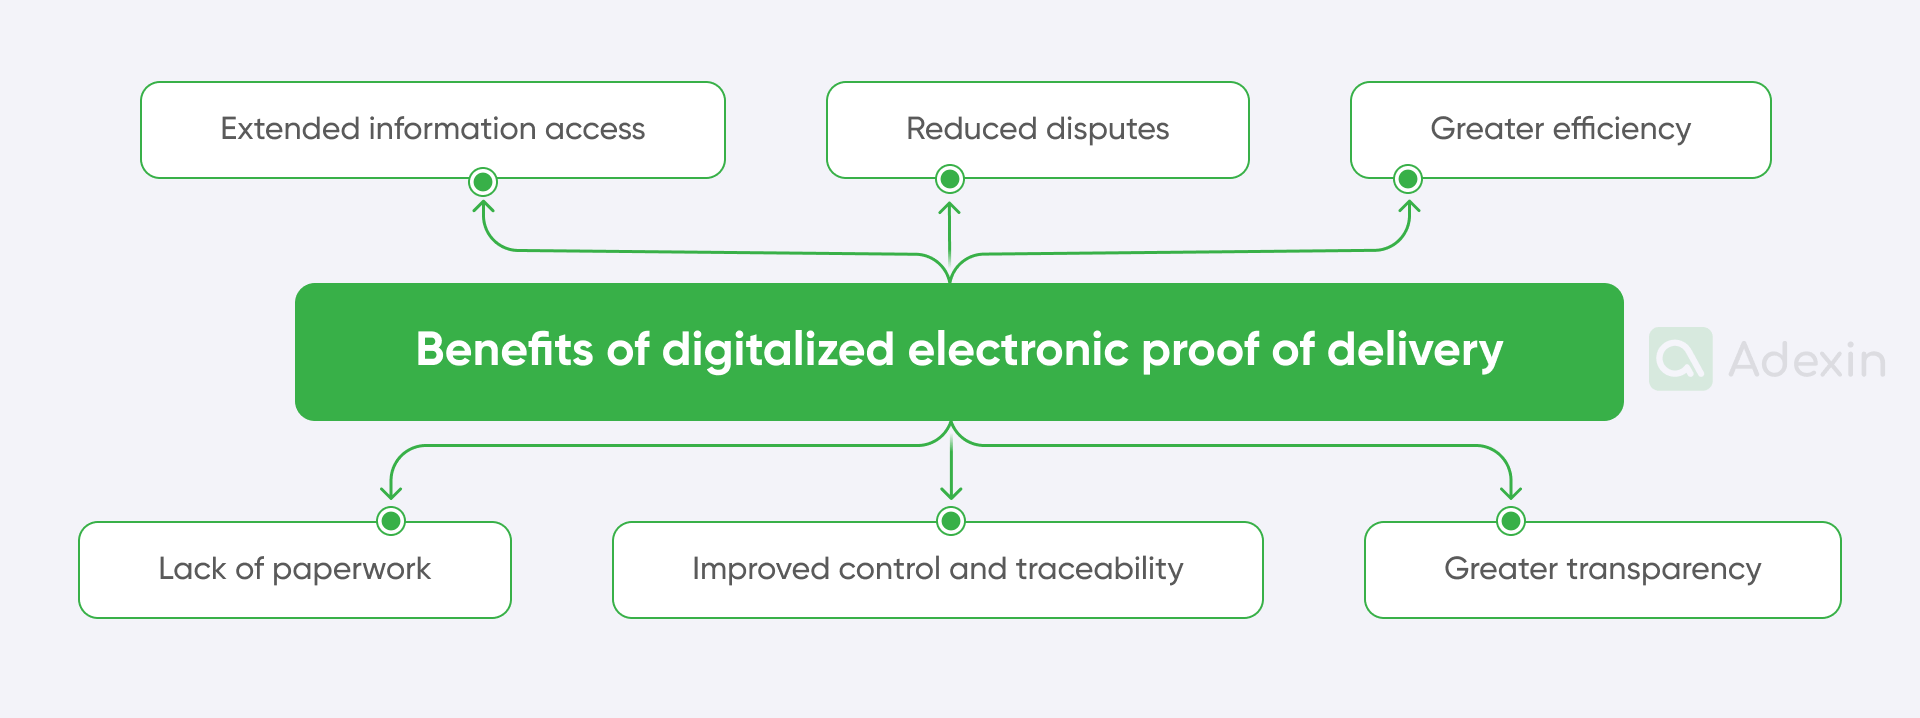 Benefits of digitalized electronic proof of delivery